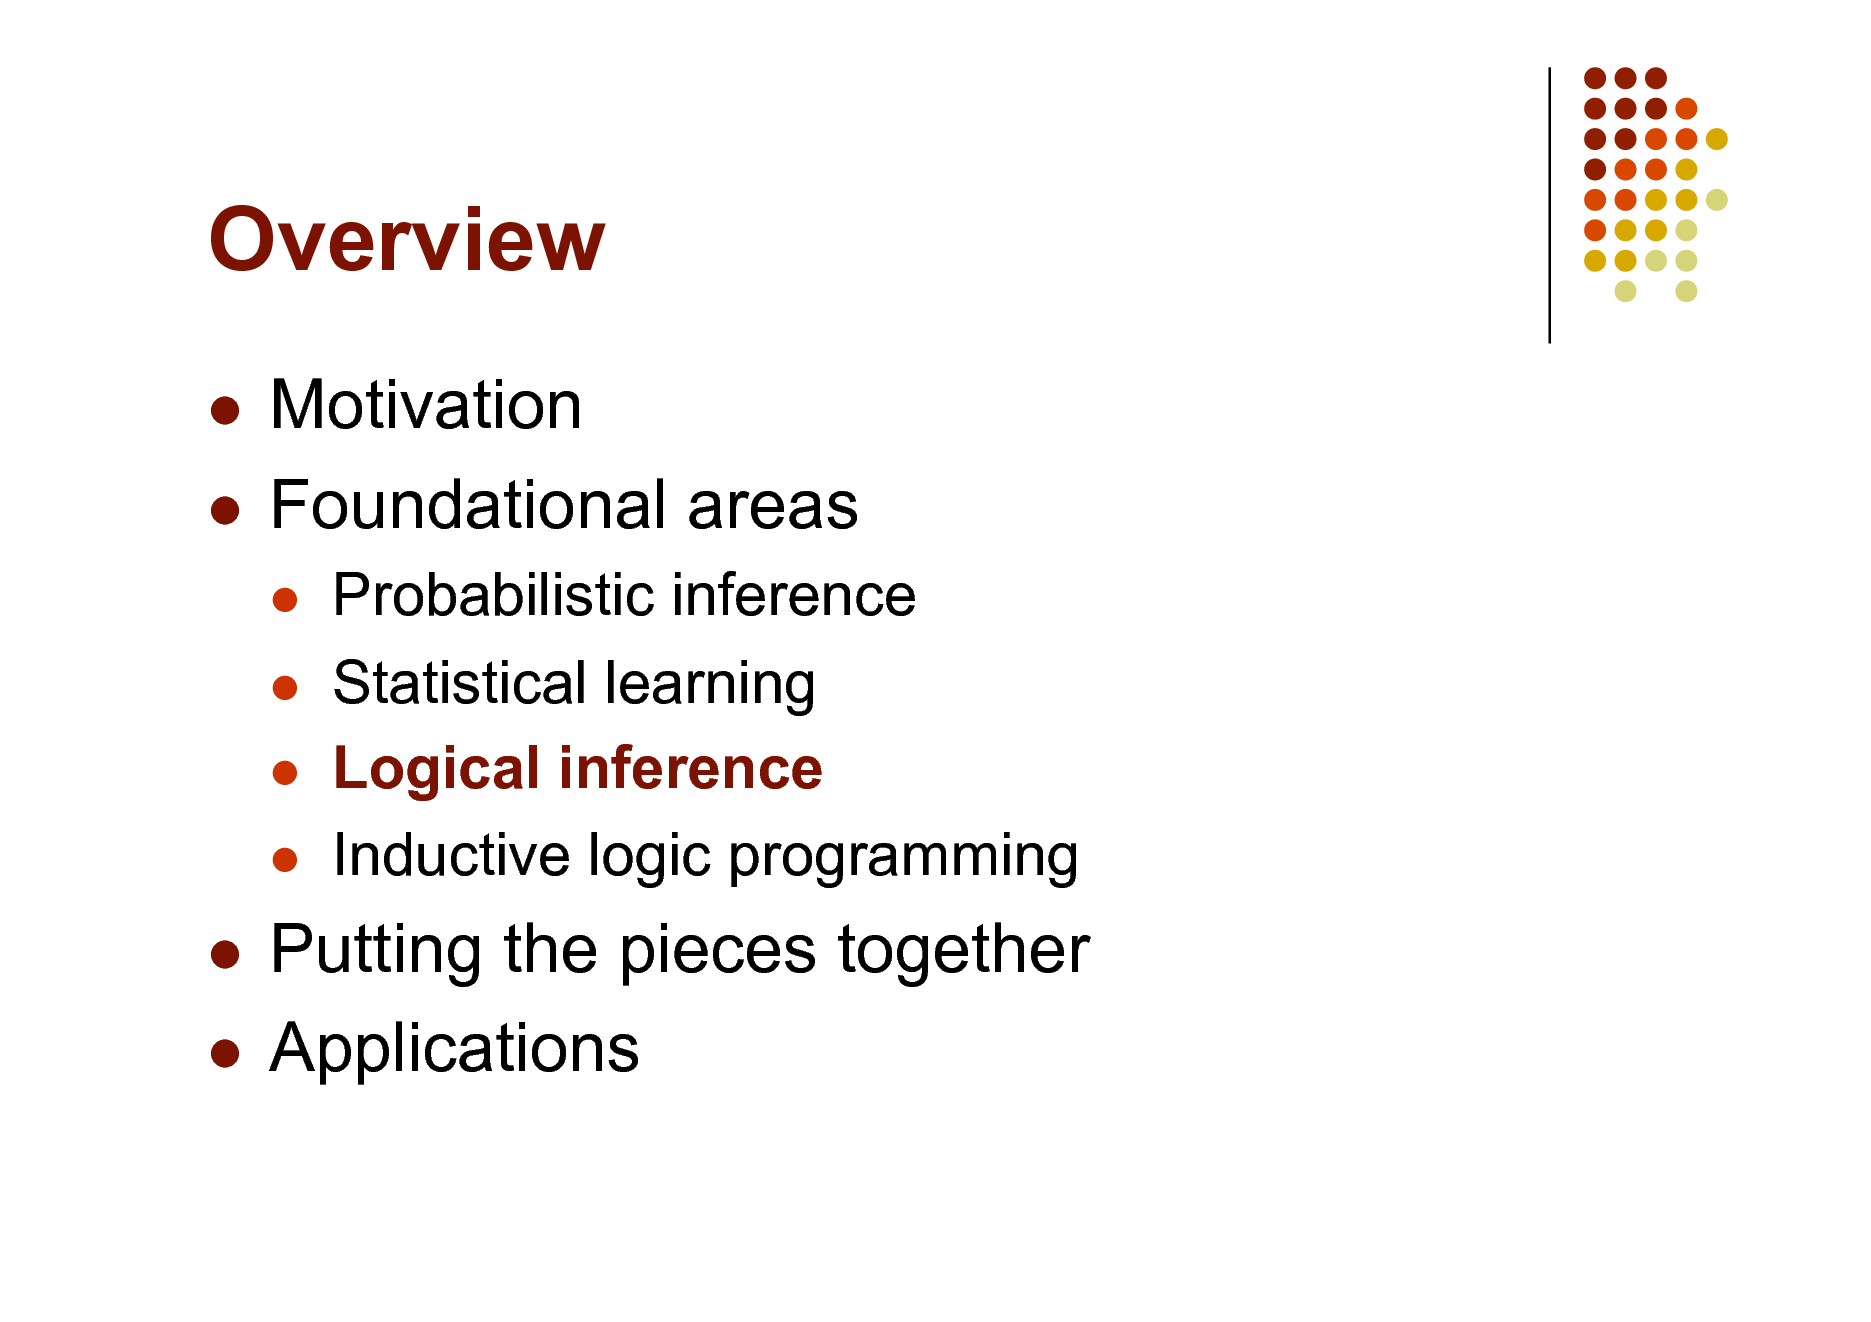 Slide: Overview
Motivation  Foundational areas

   

Probabilistic inference Statistical learning Logical inference Inductive logic programming

Putting the pieces together  Applications


